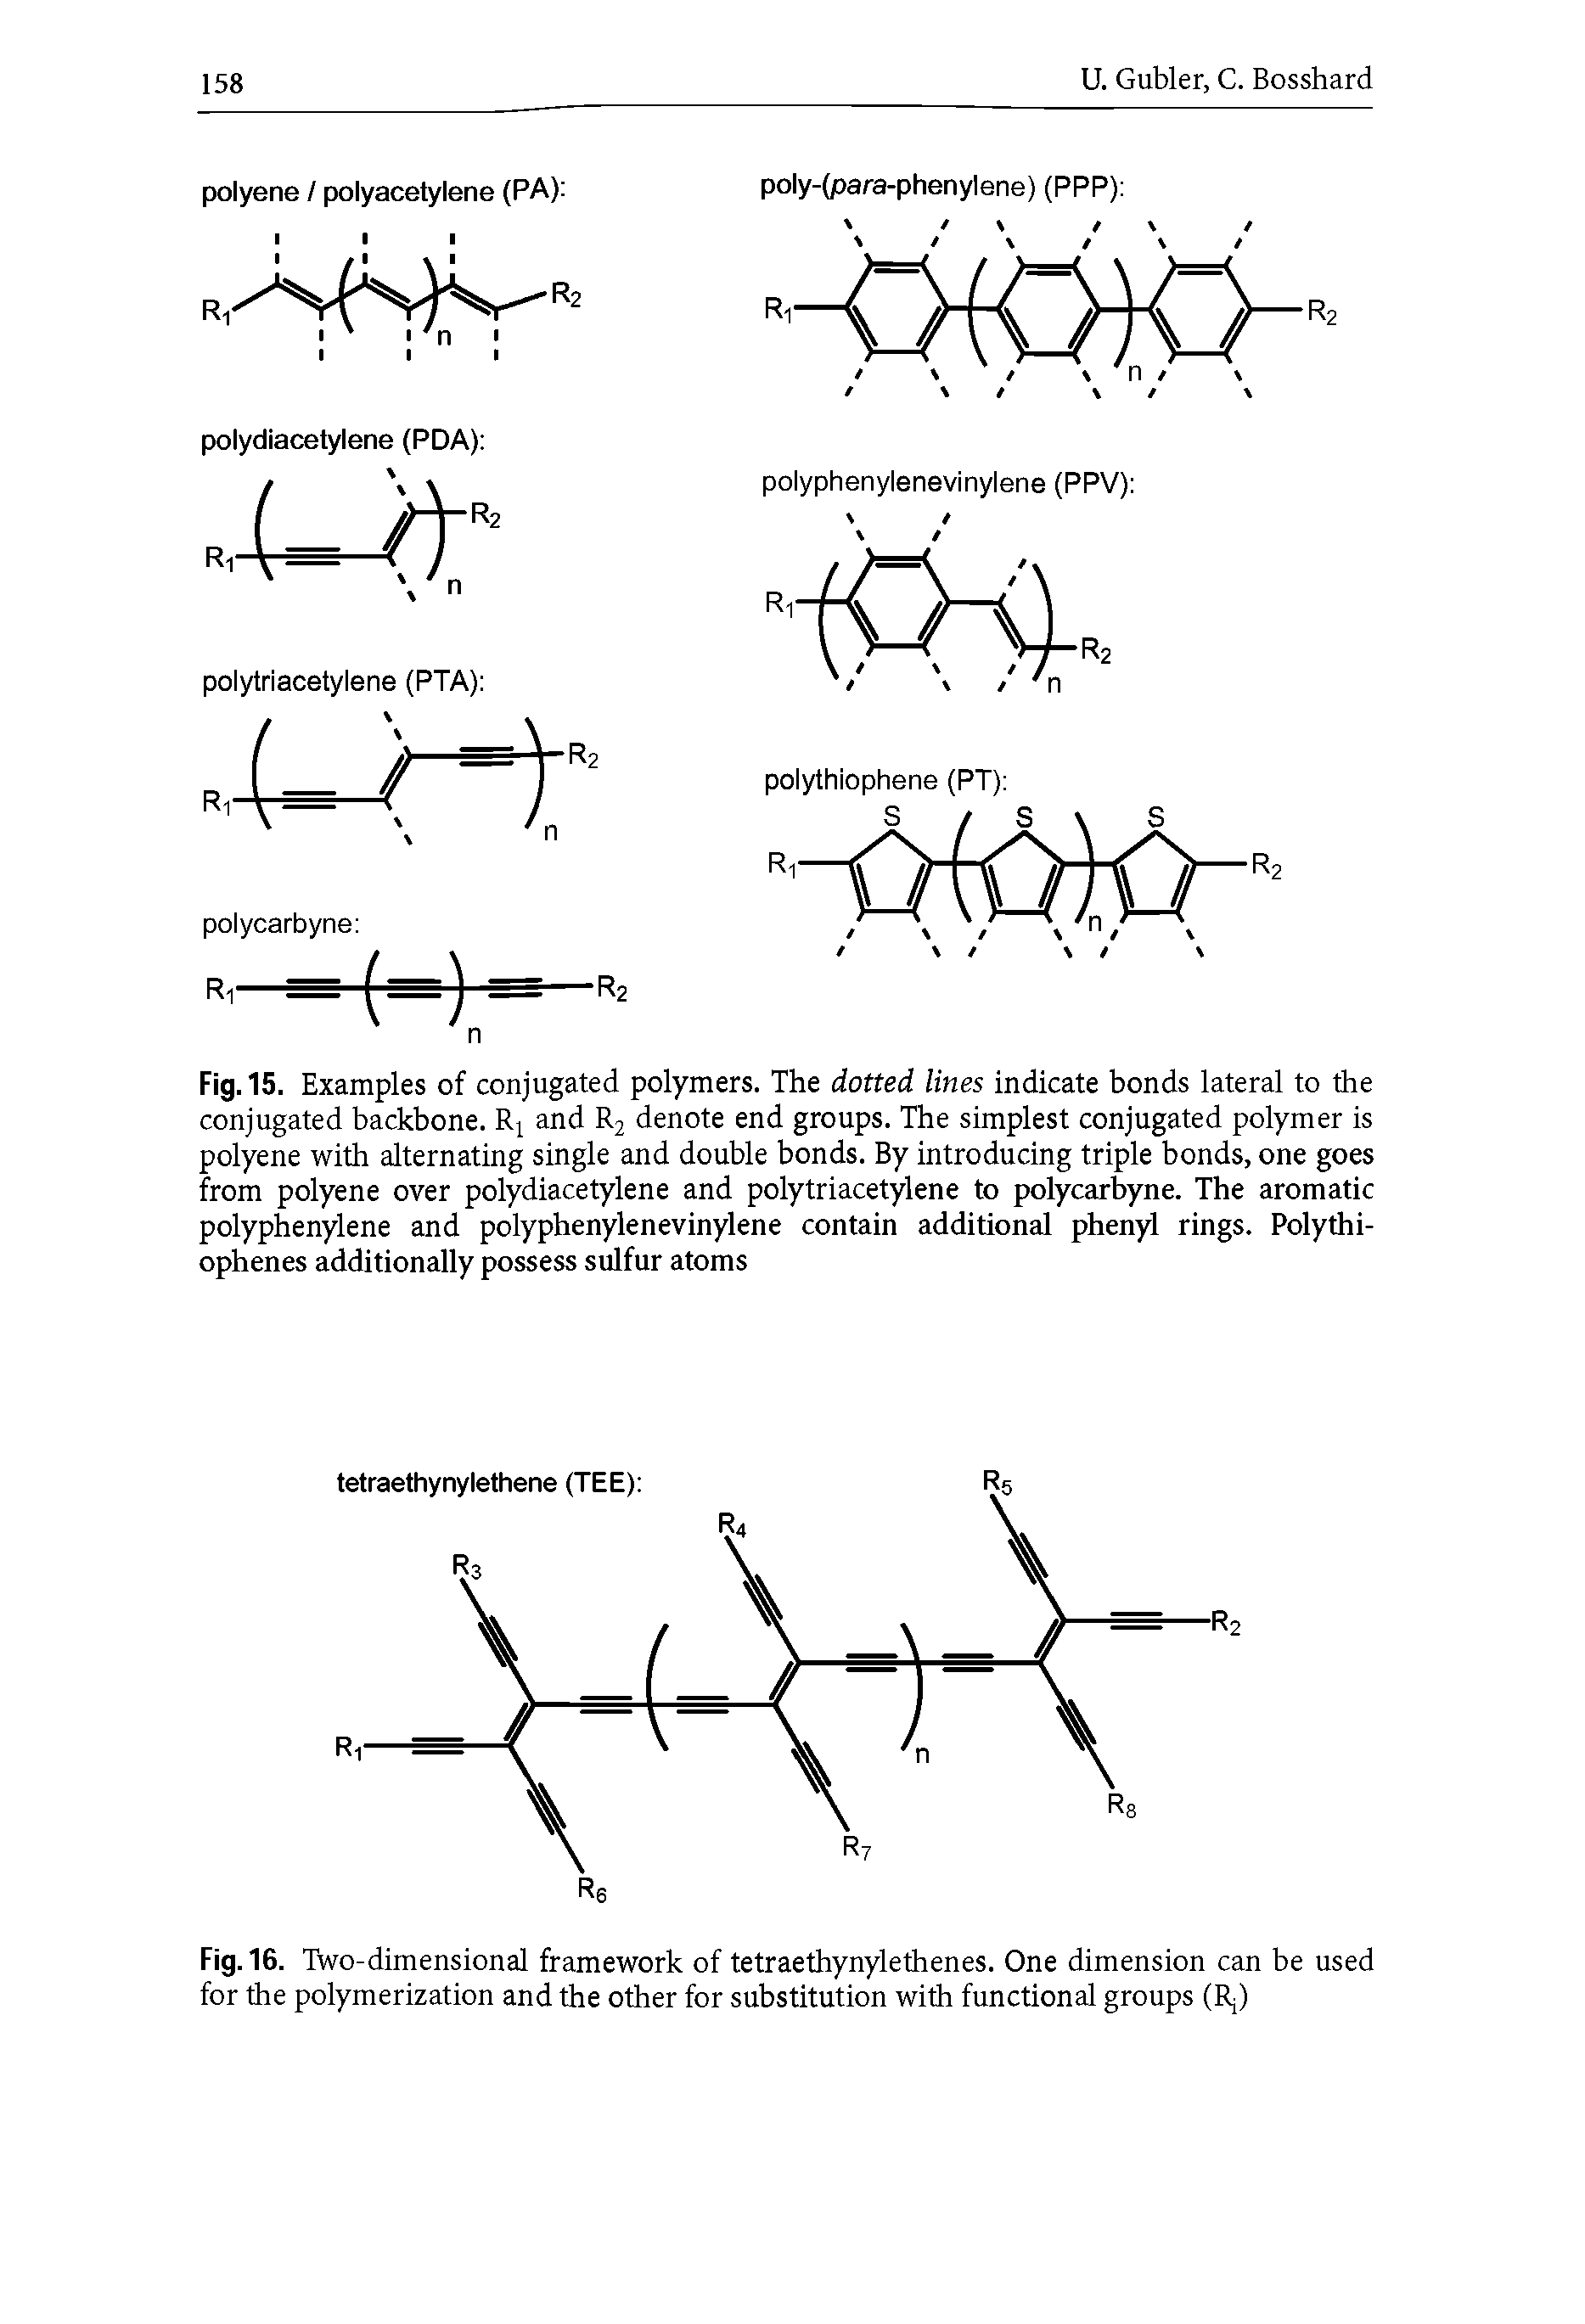 Fig. 15. Examples of conjugated polymers. The dotted lines indicate bonds lateral to the conjugated backbone. R and R2 denote end groups. The simplest conjugated polymer is polyene with alternating single and double bonds. By introducing triple bonds, one goes from polyene over polydiacetylene and polytriacetylene to polycarbyne. The aromatic polyphenylene and polyphenylenevinylene contain additional phenyl rings. Polythiophenes additionally possess sulfur atoms...